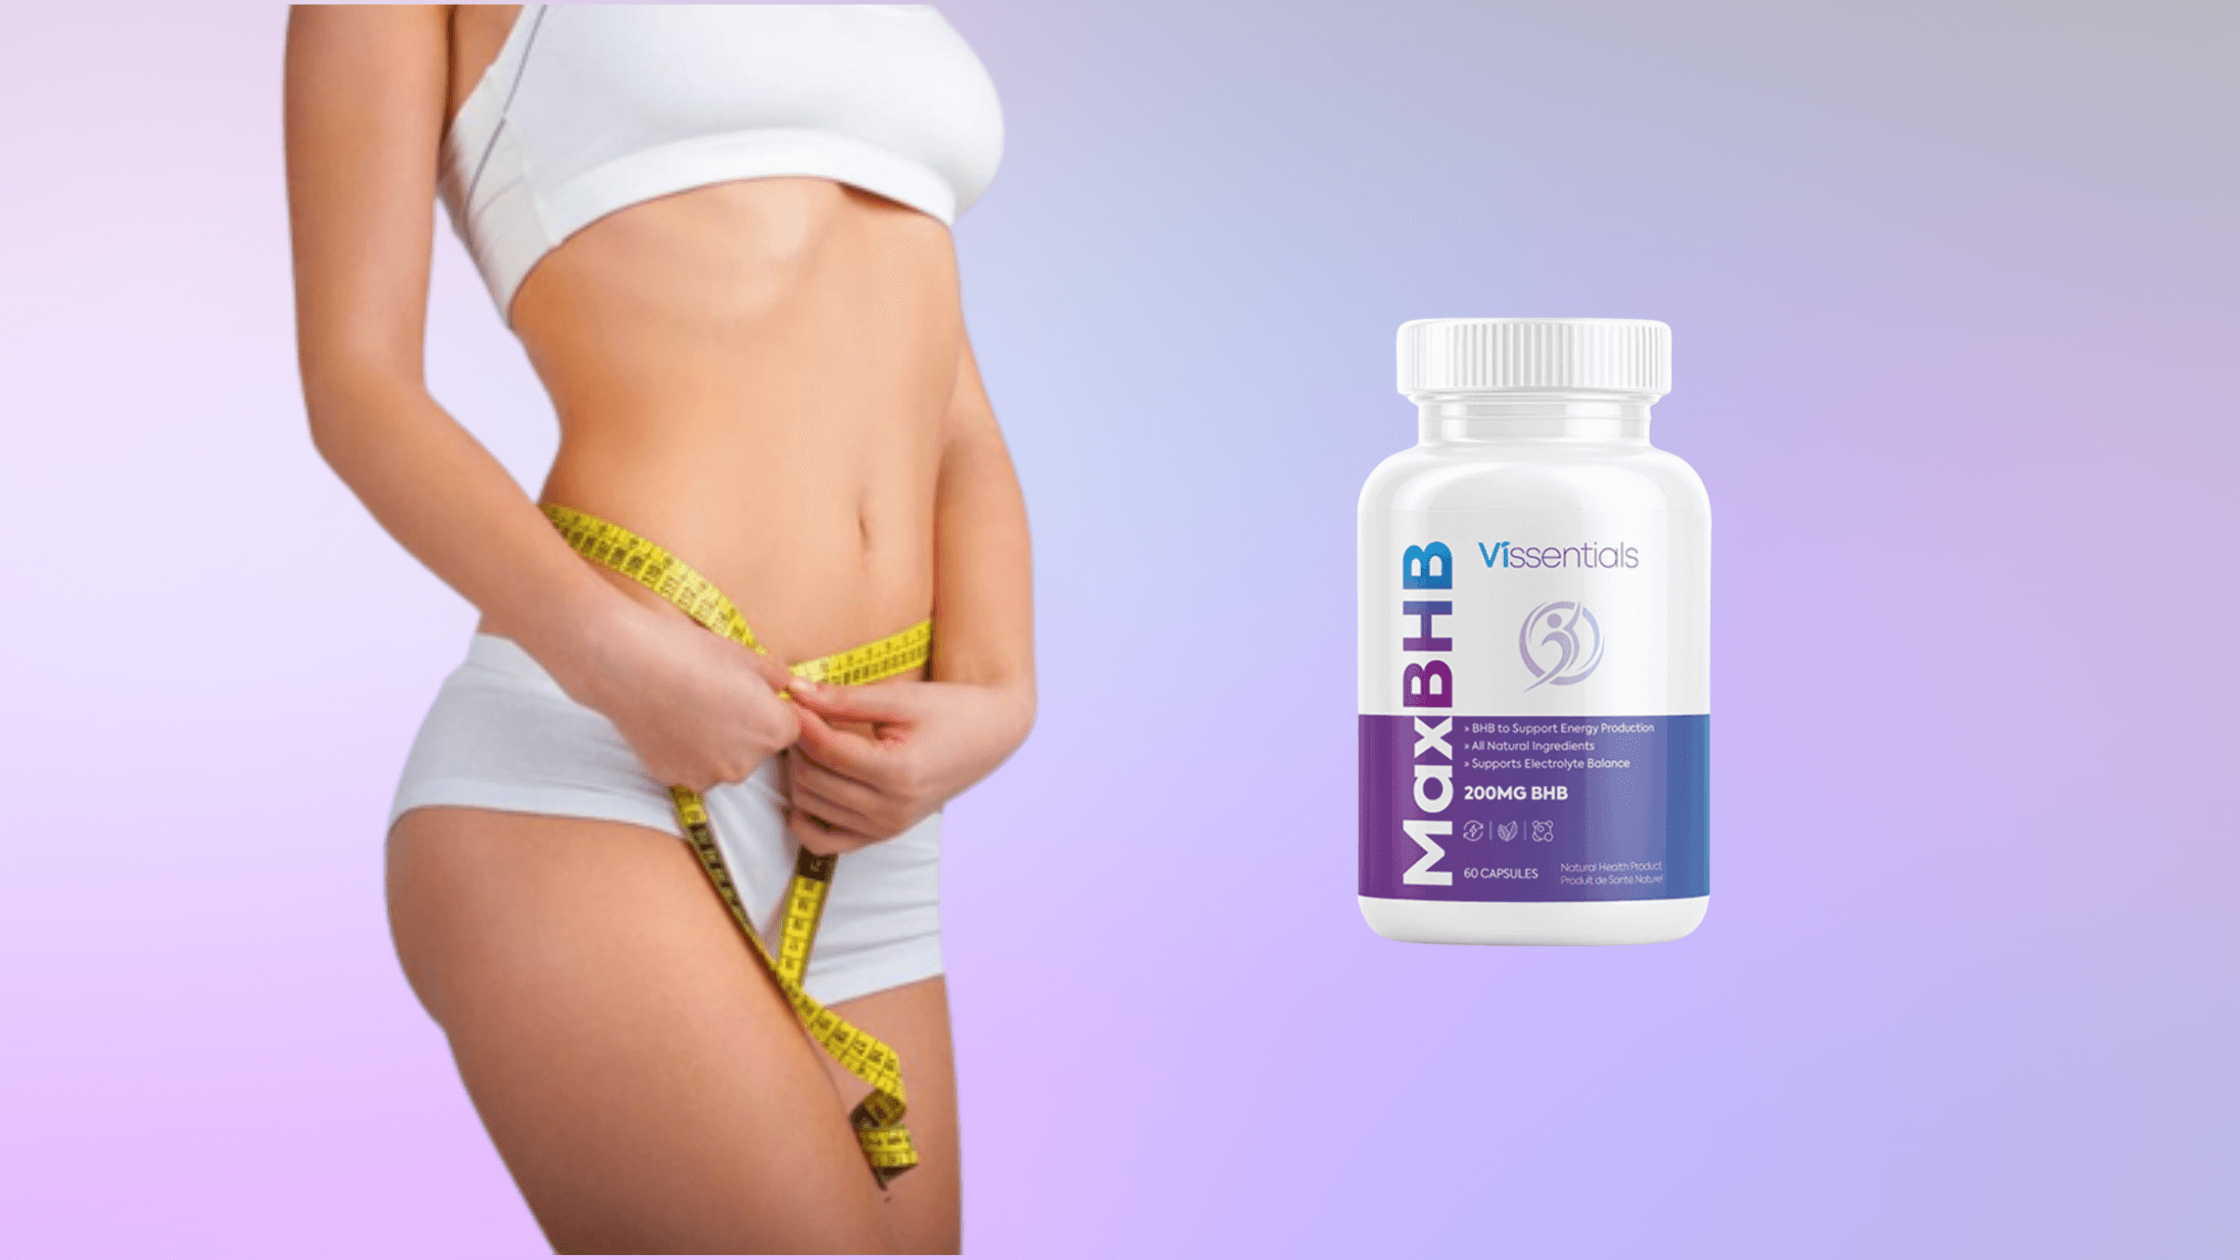 Vissentials Max BHB - Weight Loss Pills (Legit or Scam) Price and Results?